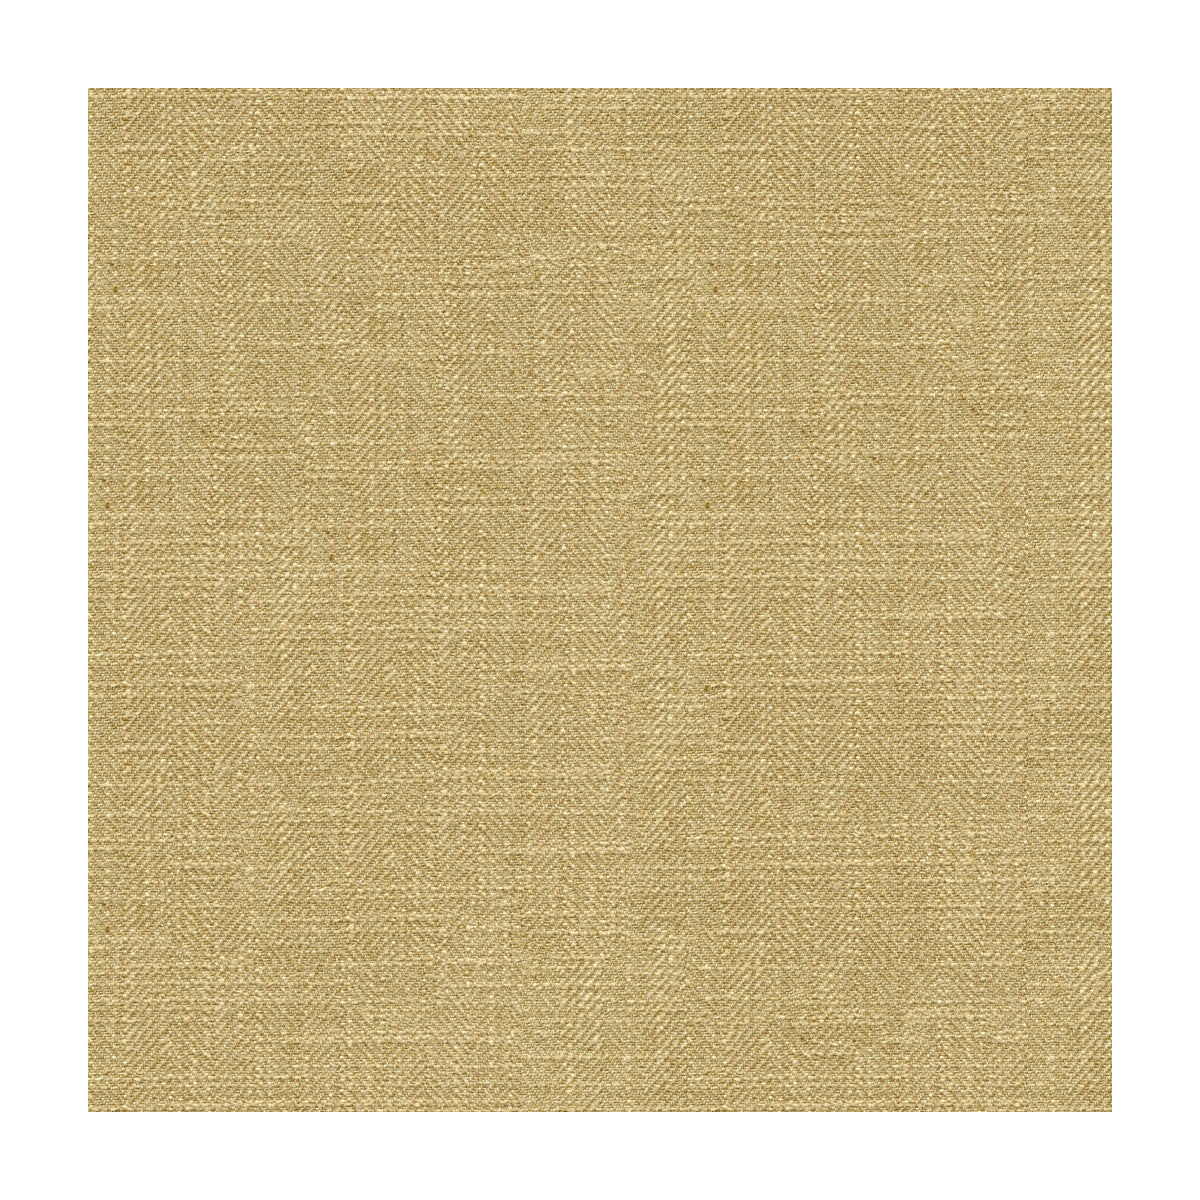 Kravet Basics fabric in 33842-1616 color - pattern 33842.1616.0 - by Kravet Basics in the Perfect Plains collection